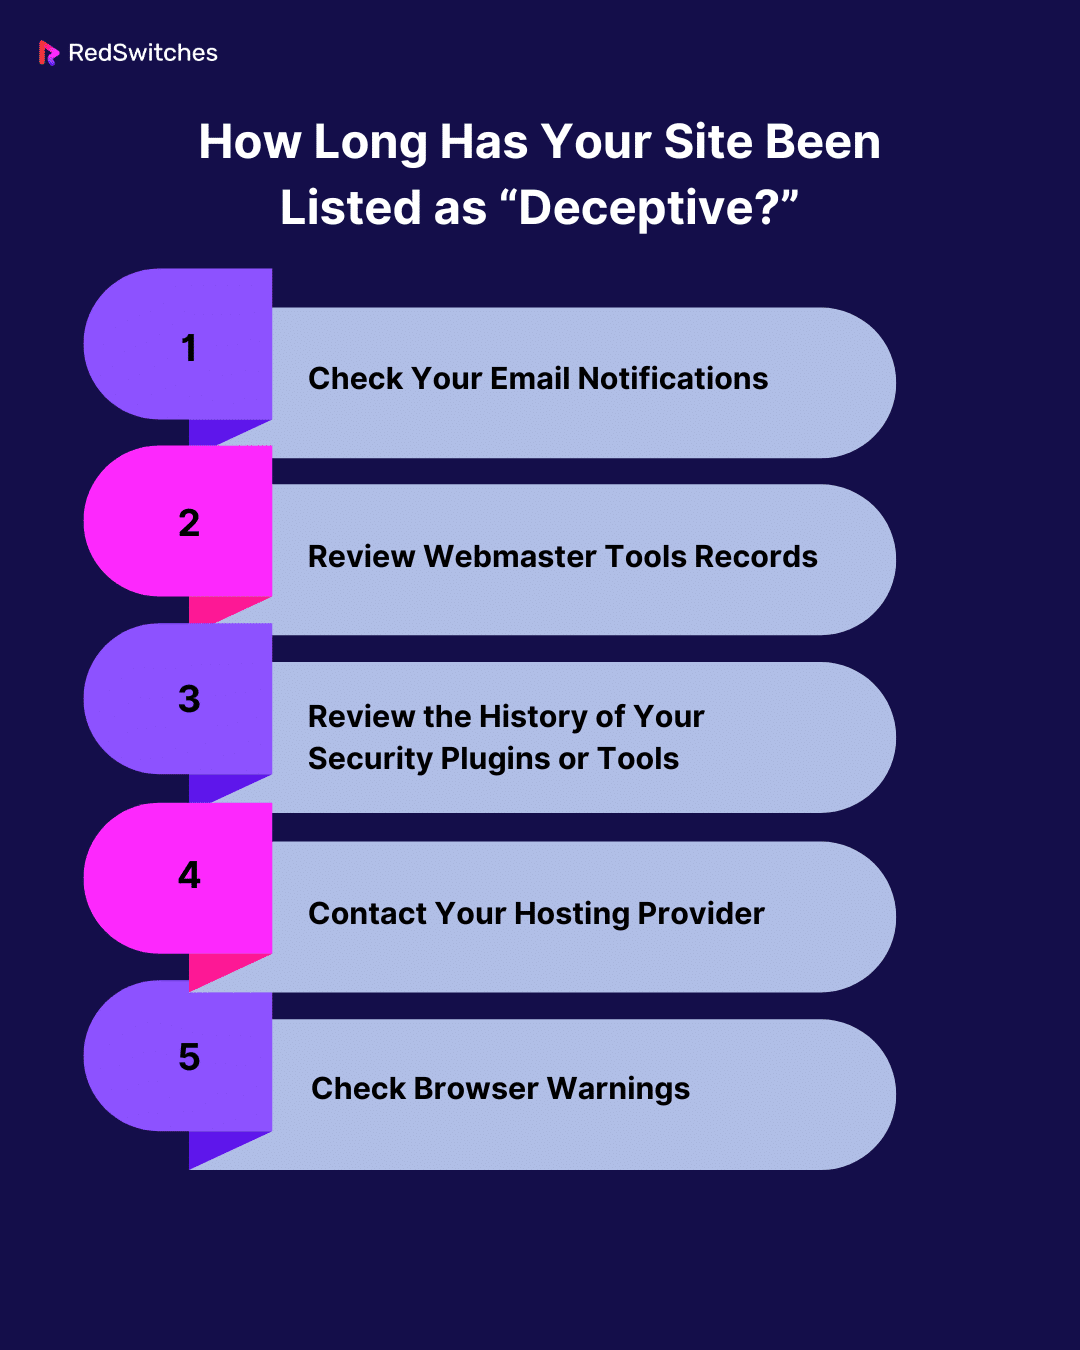 How Long Has Your Site Been Listed as “Deceptive